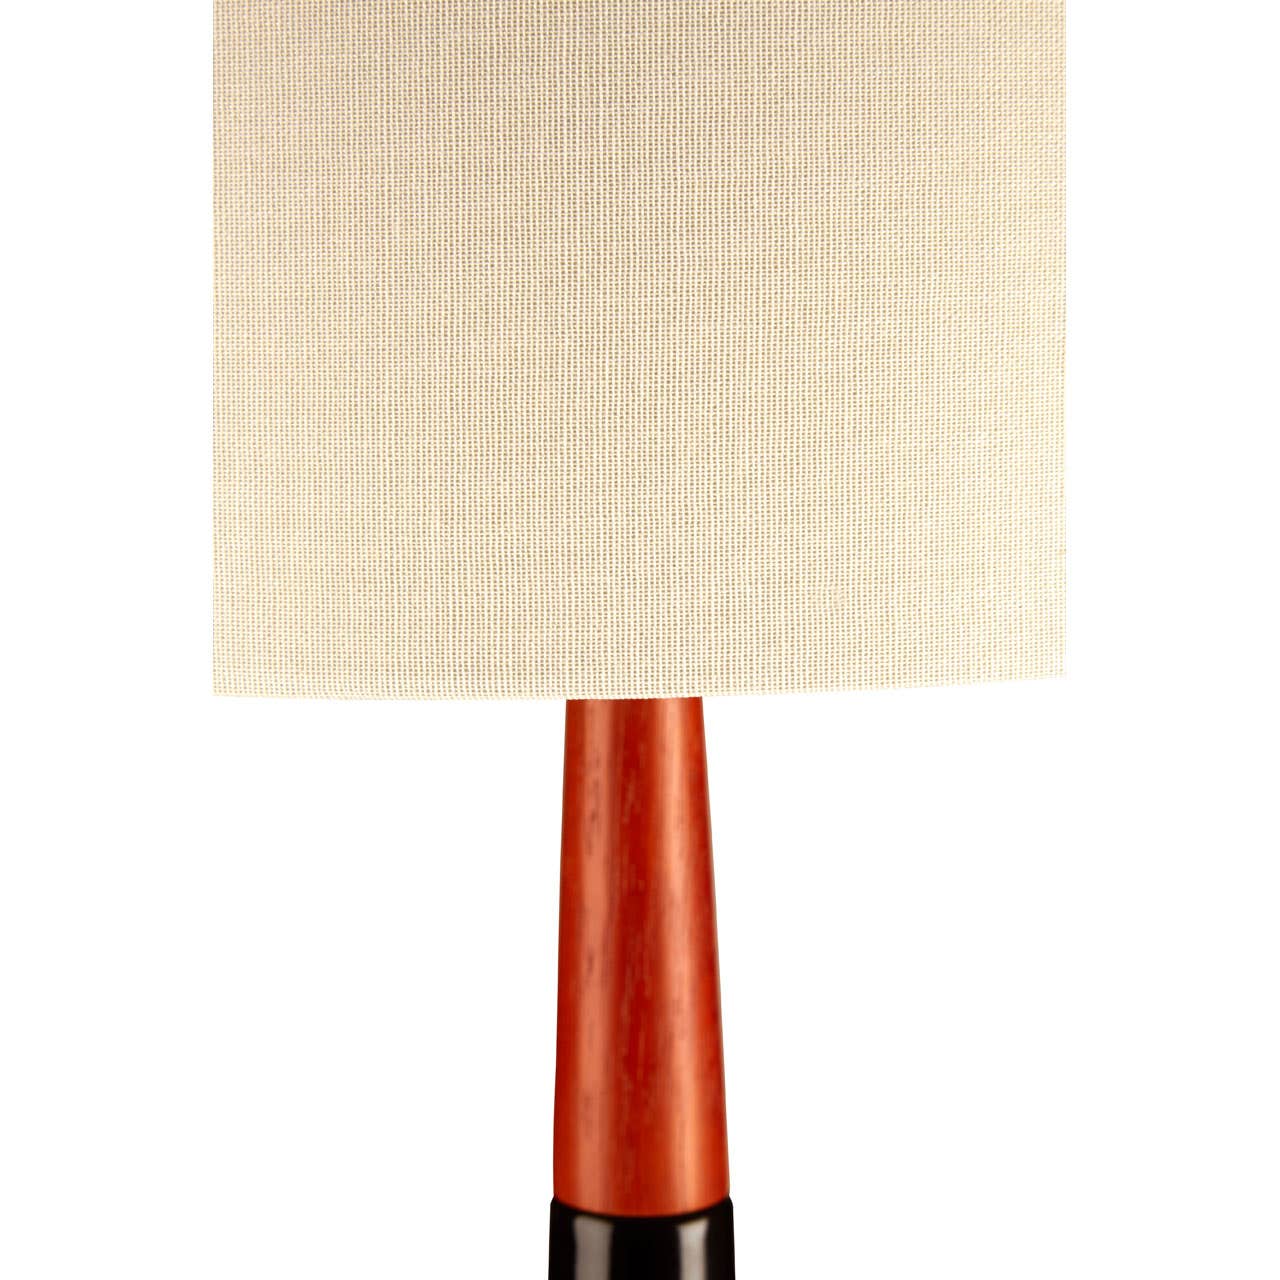 Noosa & Co. Lighting Sirus Table Lamp With Wood And Ceramic Base | OUTLET House of Isabella UK